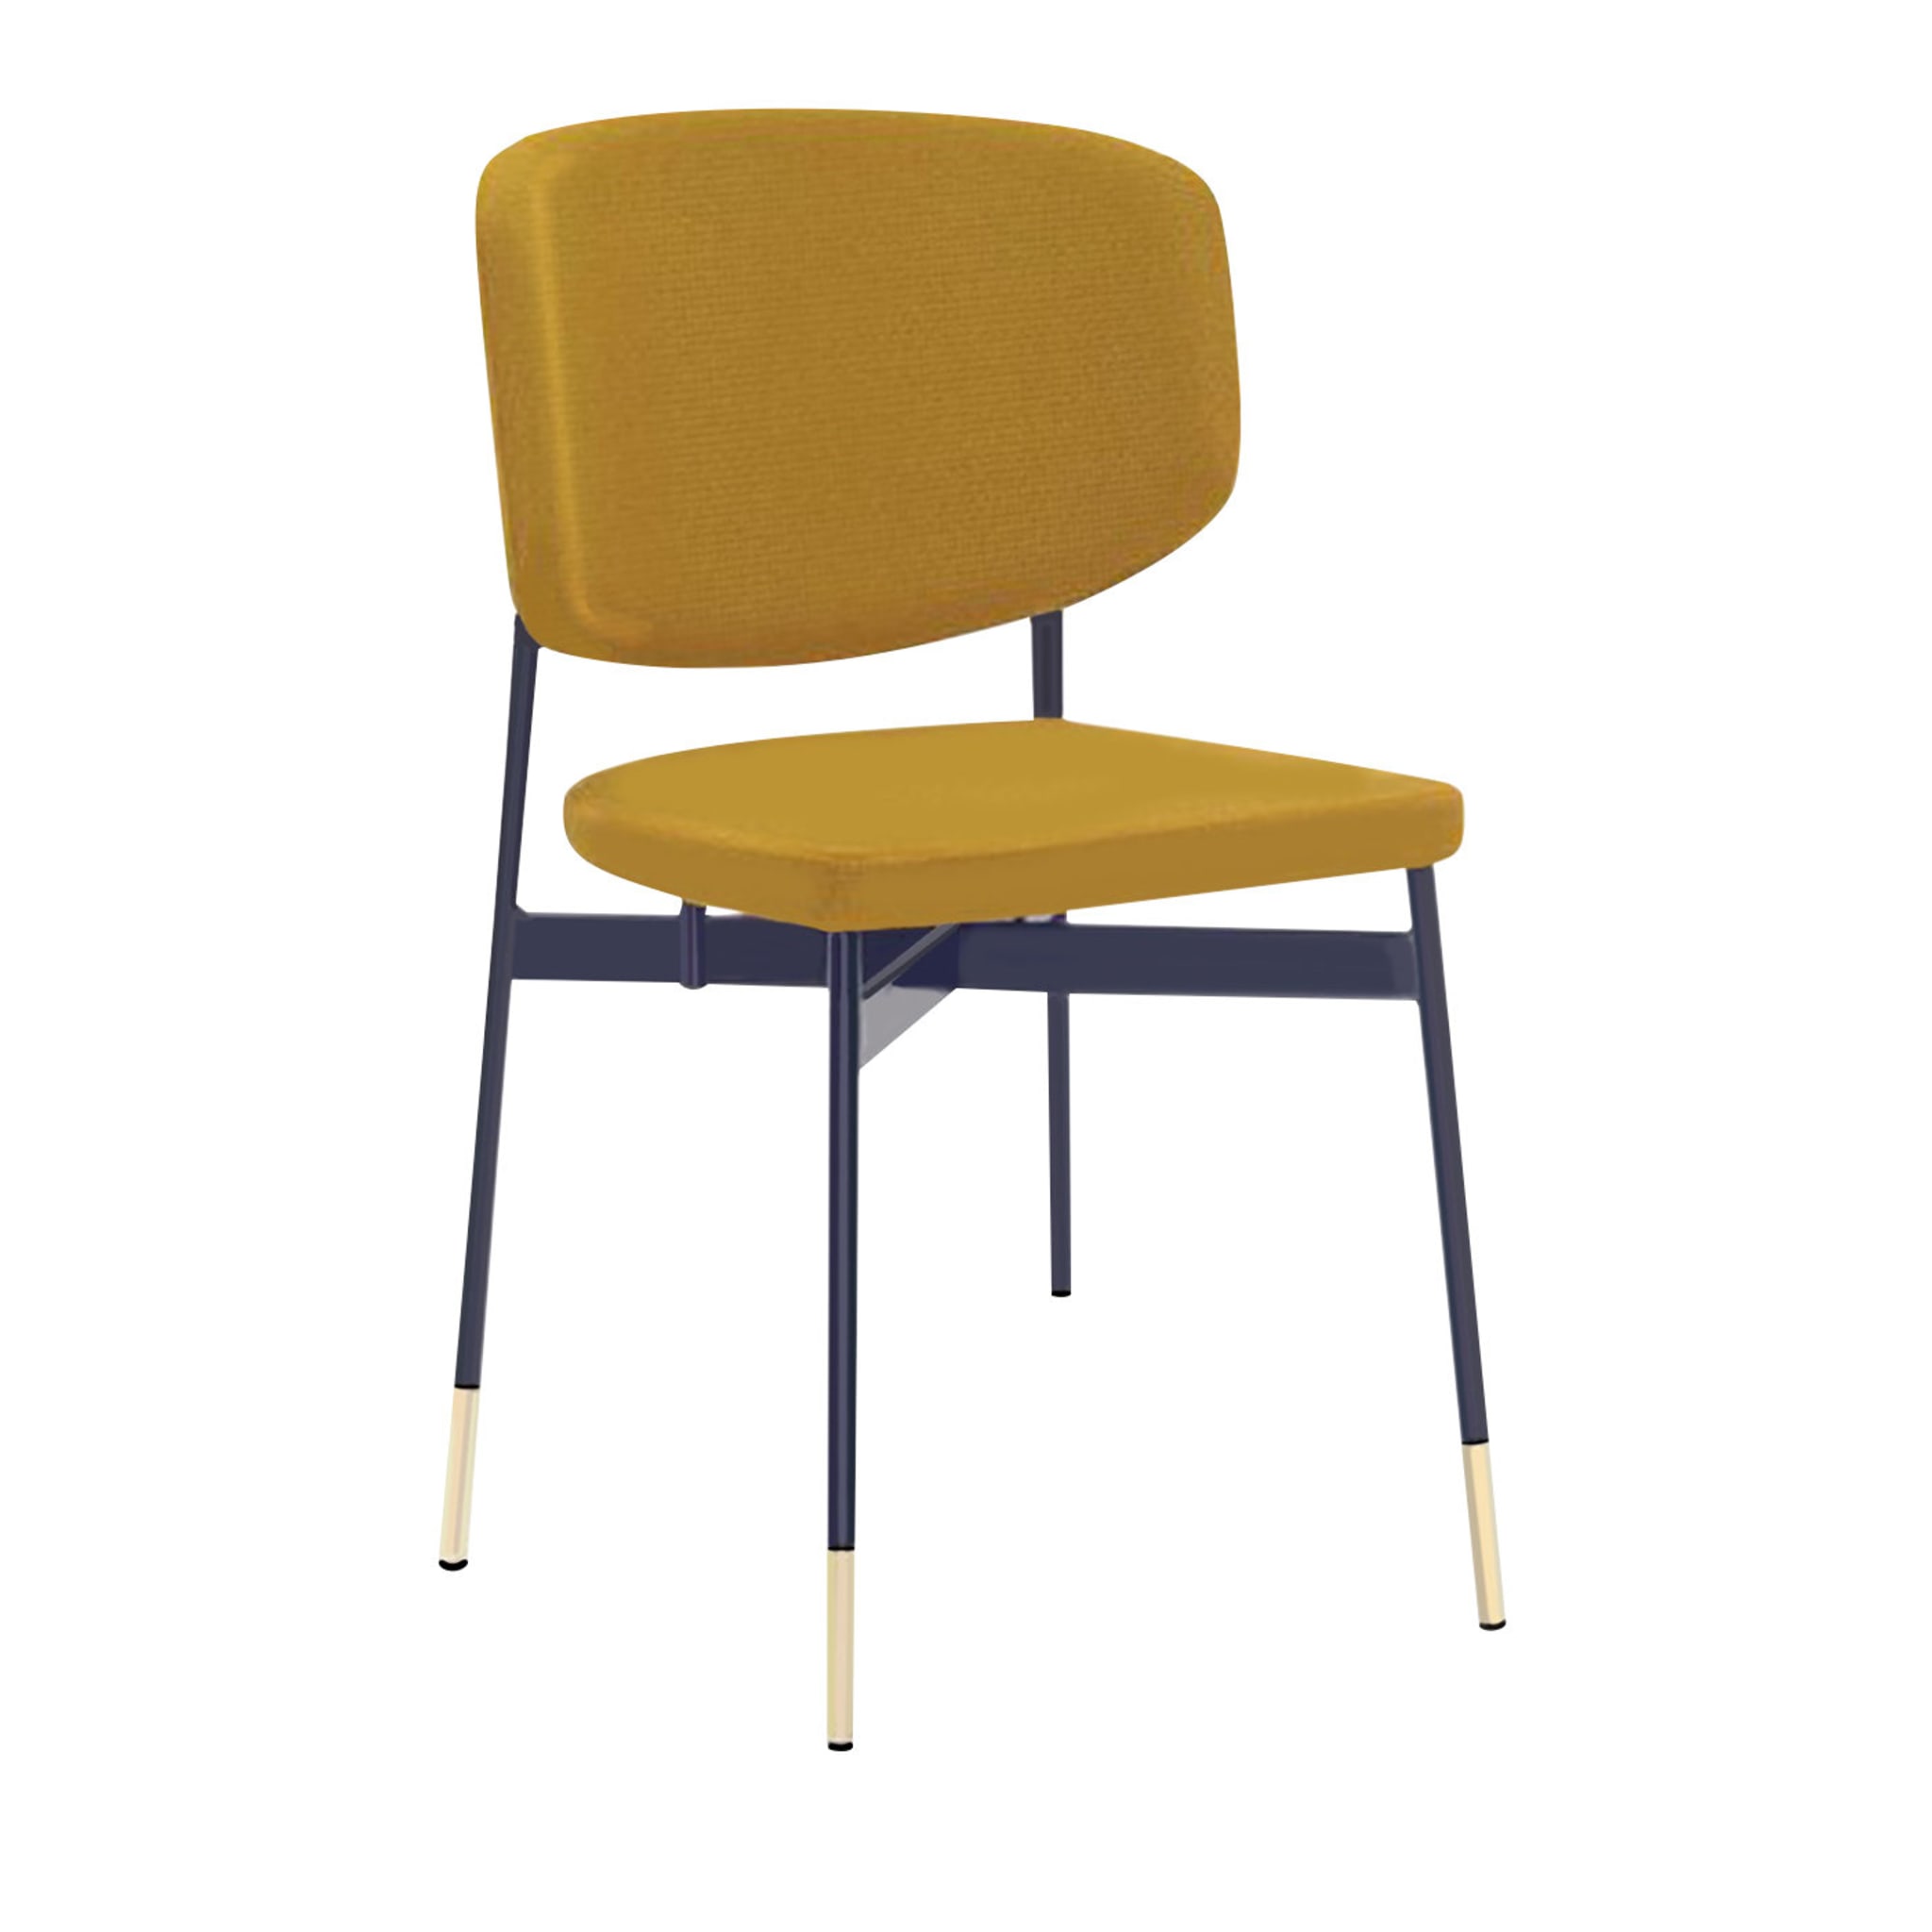 Set of 4 Ares Mustard Chairs - Main view